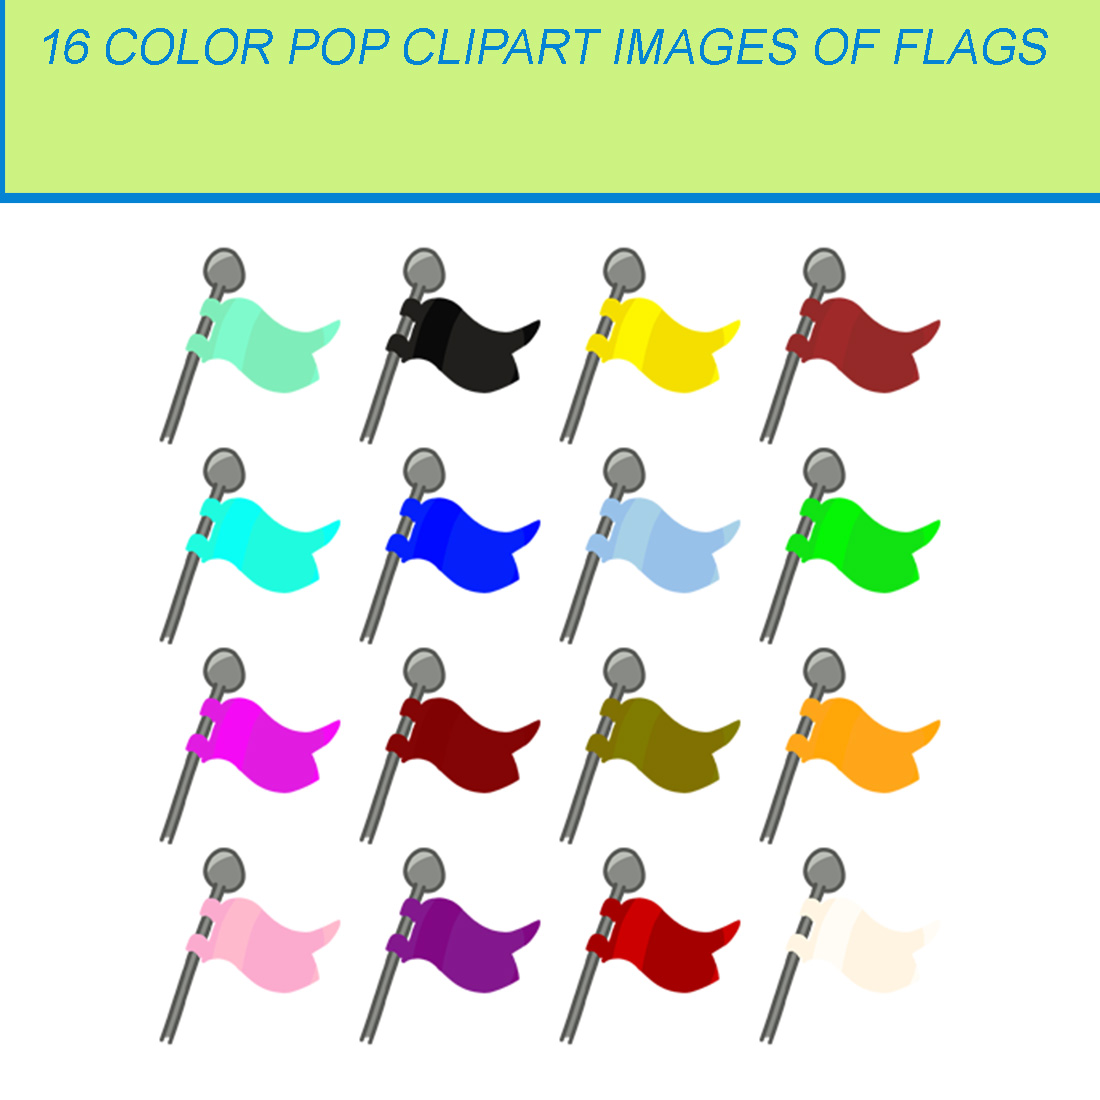 16 COLOR POP CLIPART IMAGES OF FLAGS cover image.